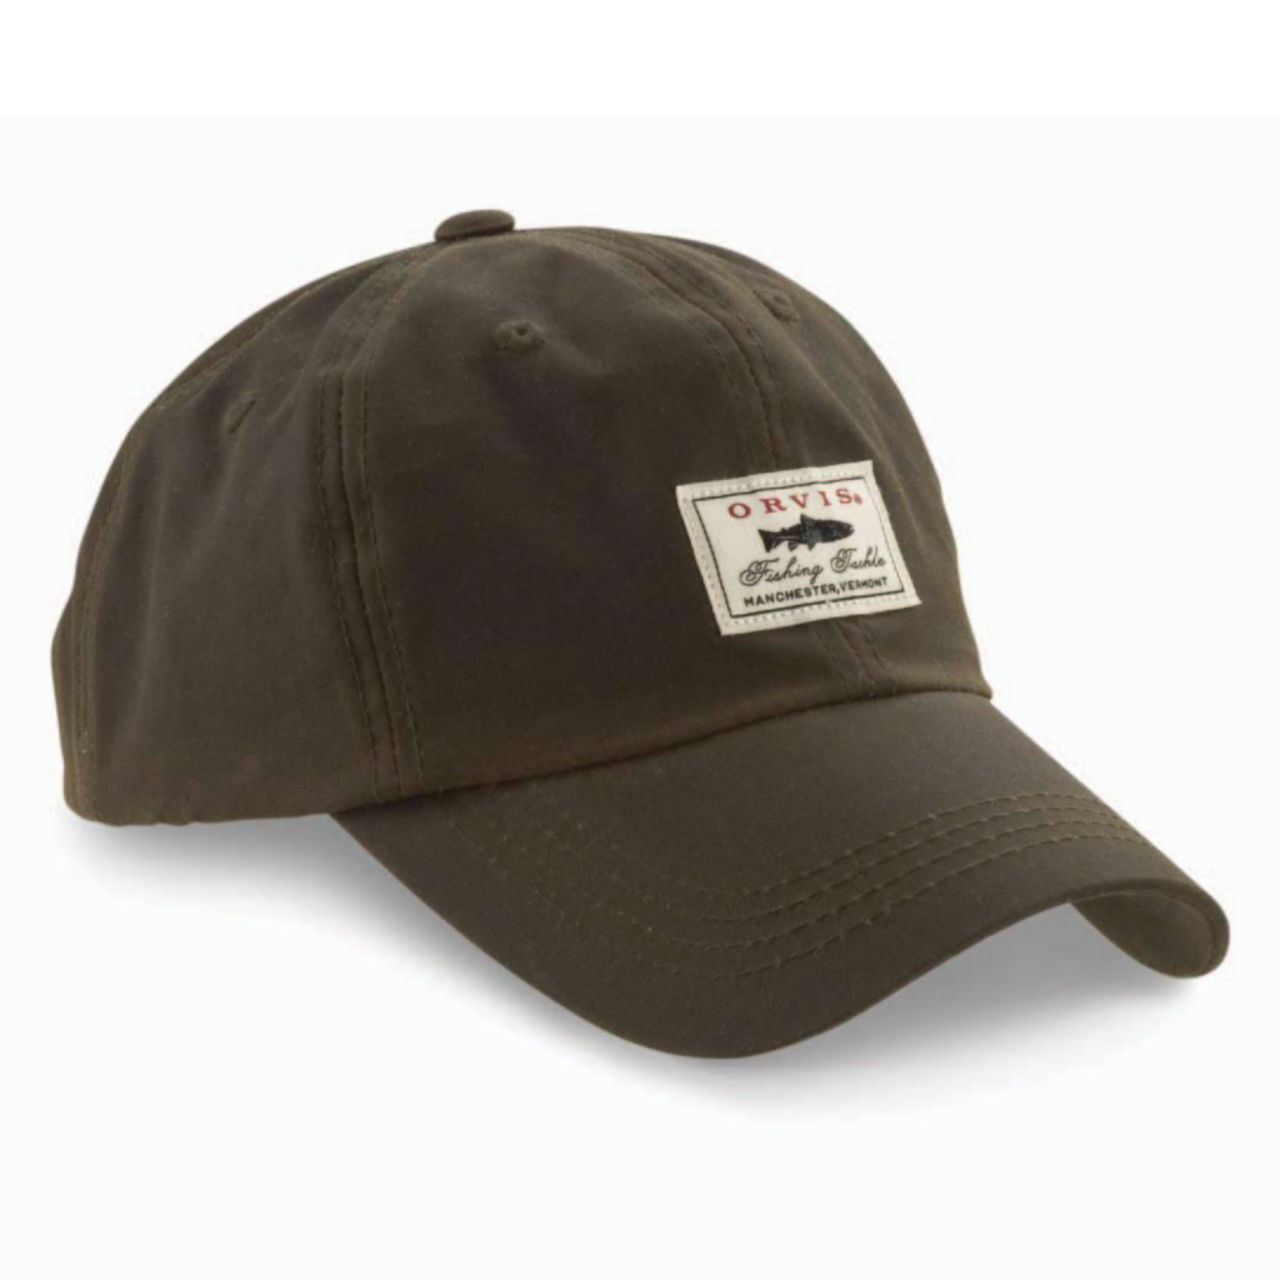 Vintage Waxed Cotton Ball Cap -  image number 0